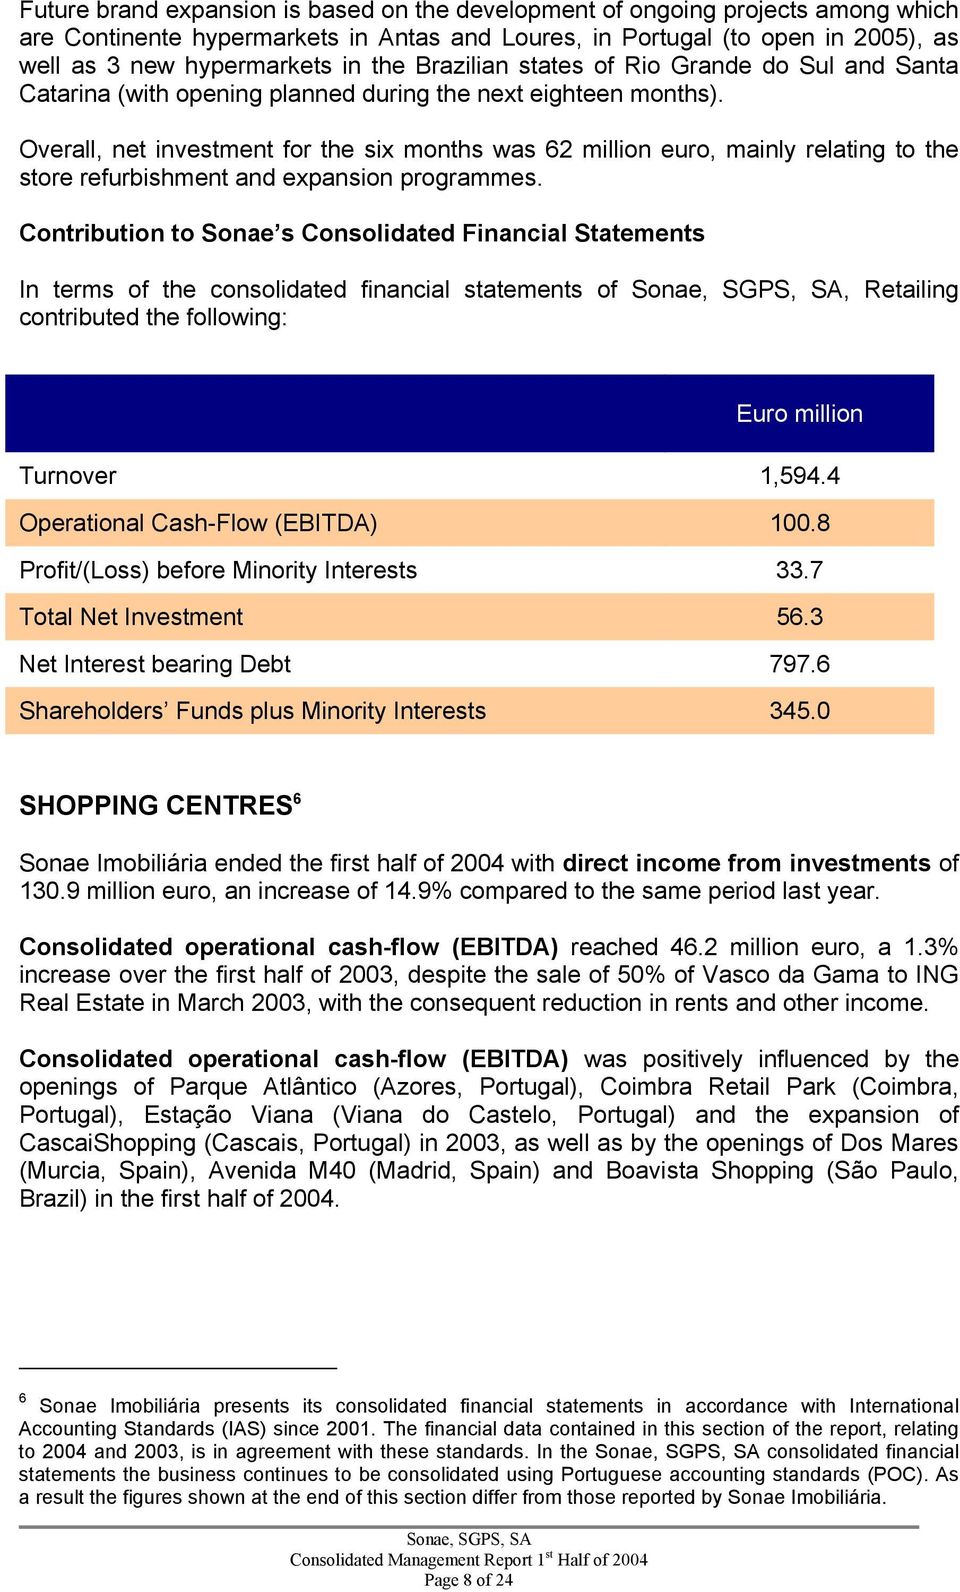 Overall, net investment for the six months was 62 million, mainly relating to the store refurbishment and expansion programmes.